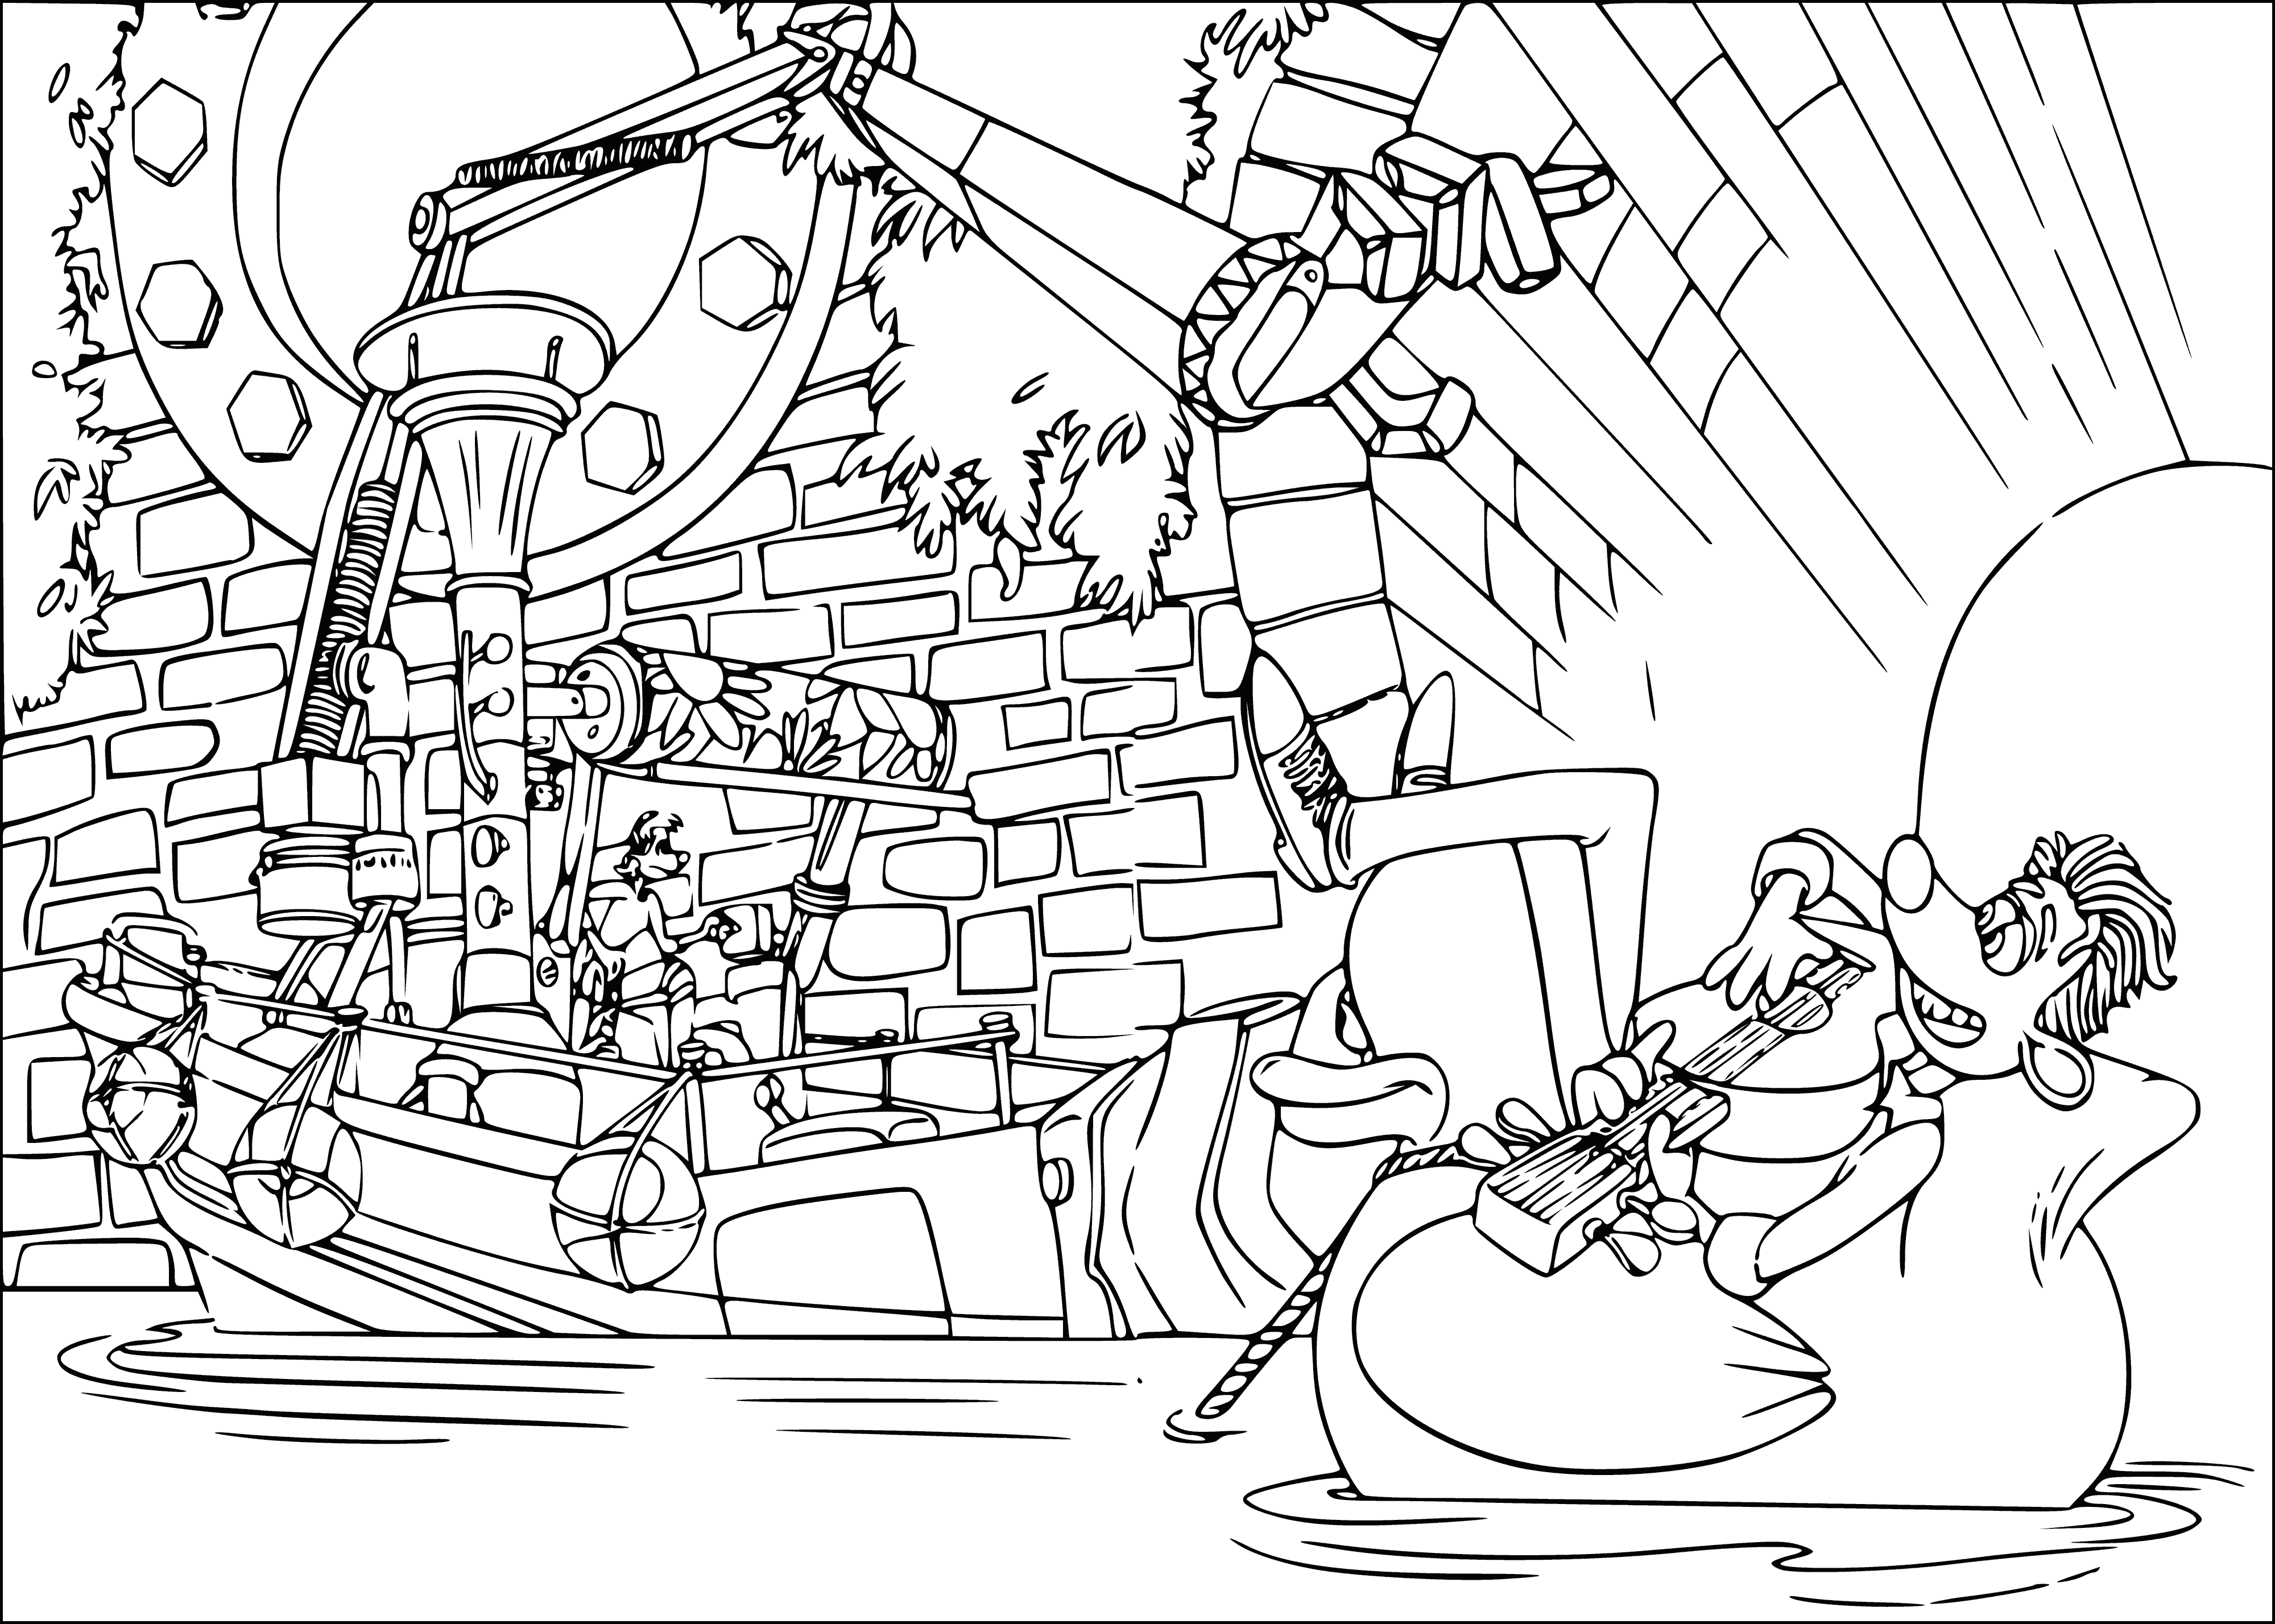 coloring page: Roddy plays his guitar on a stage, Mohawk & black outfit, to a cheering crowd.